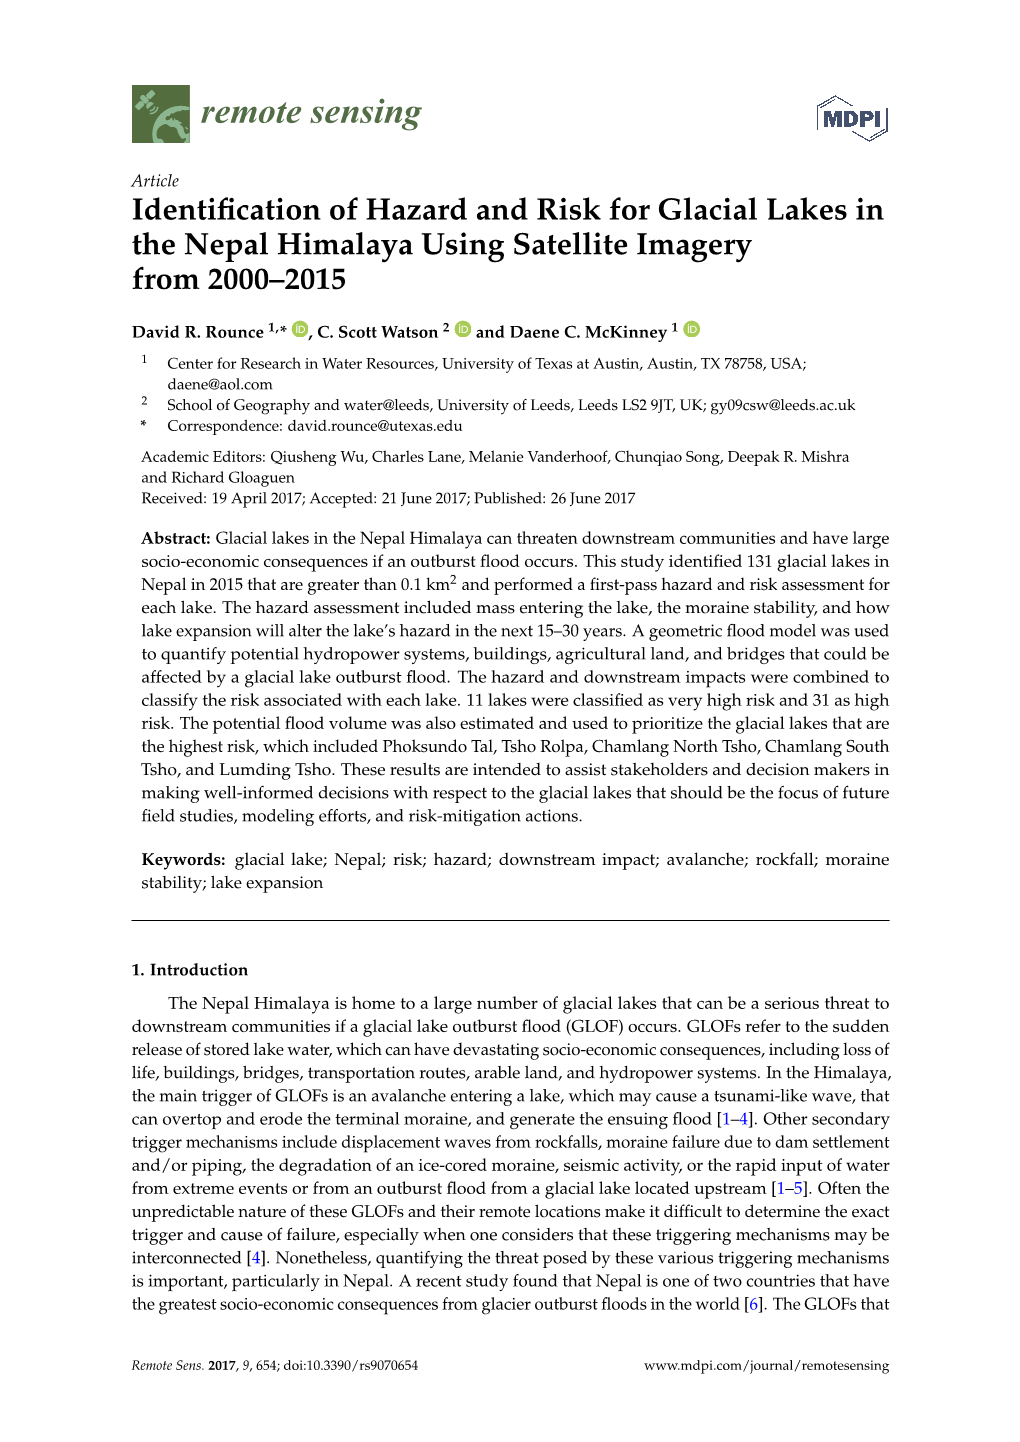 Identification of Hazard and Risk for Glacial Lakes in the Nepal